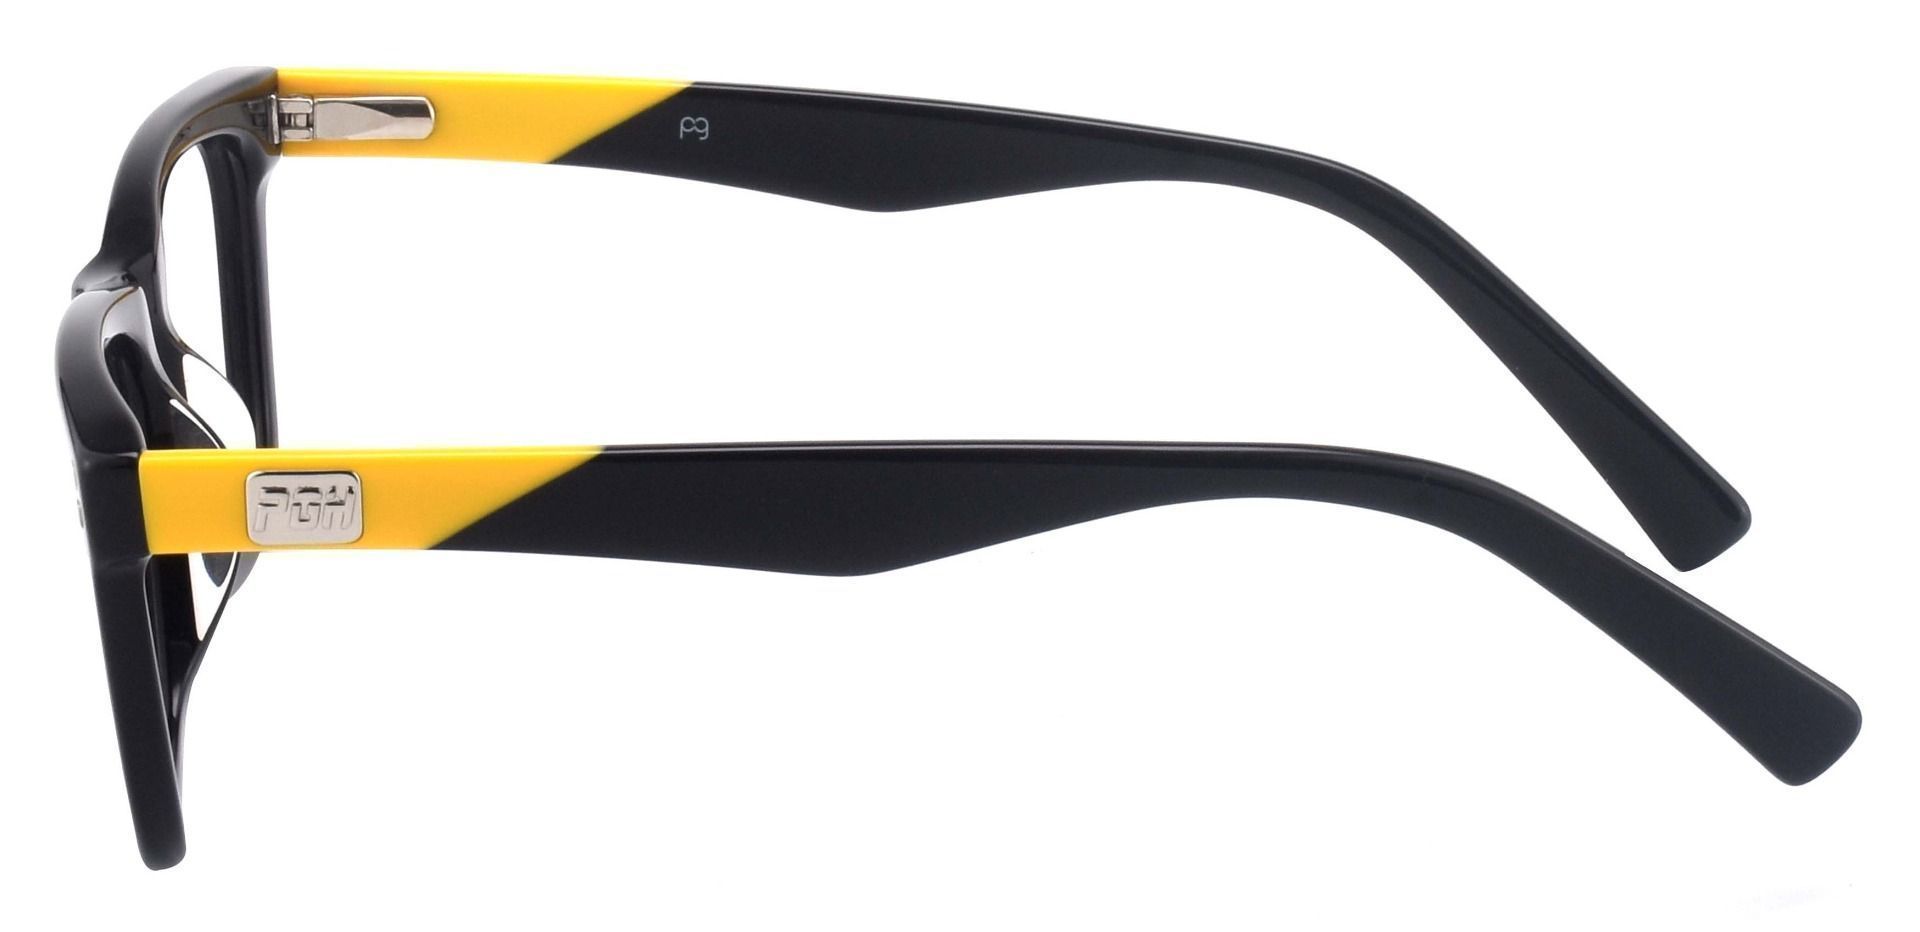 Blitz Rectangle Blue Light Blocking Glasses - The Frame Is Black And Yellow